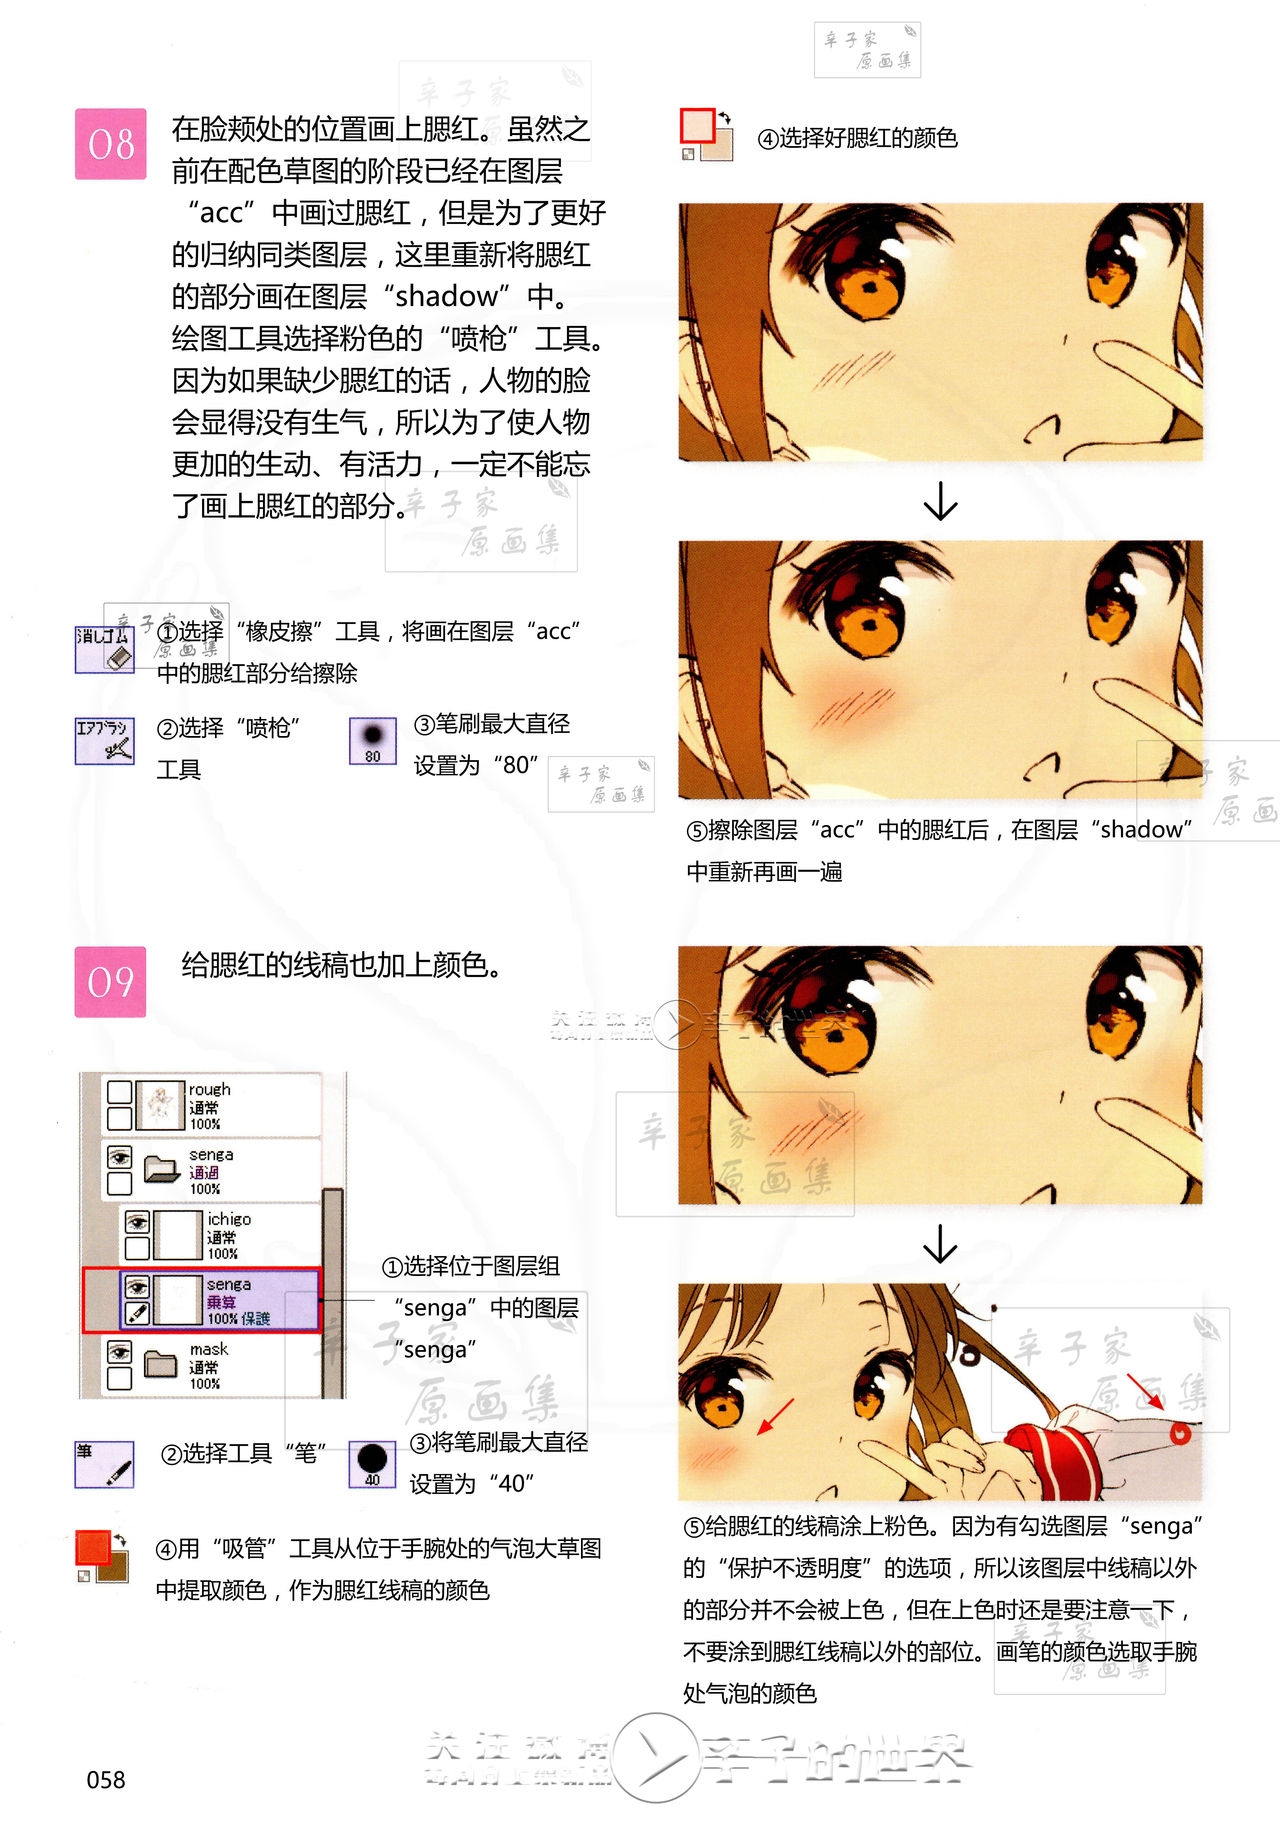 [Anmi] Lets Make ★ Character CG illustration techniques vol.9 [Chinese] 56